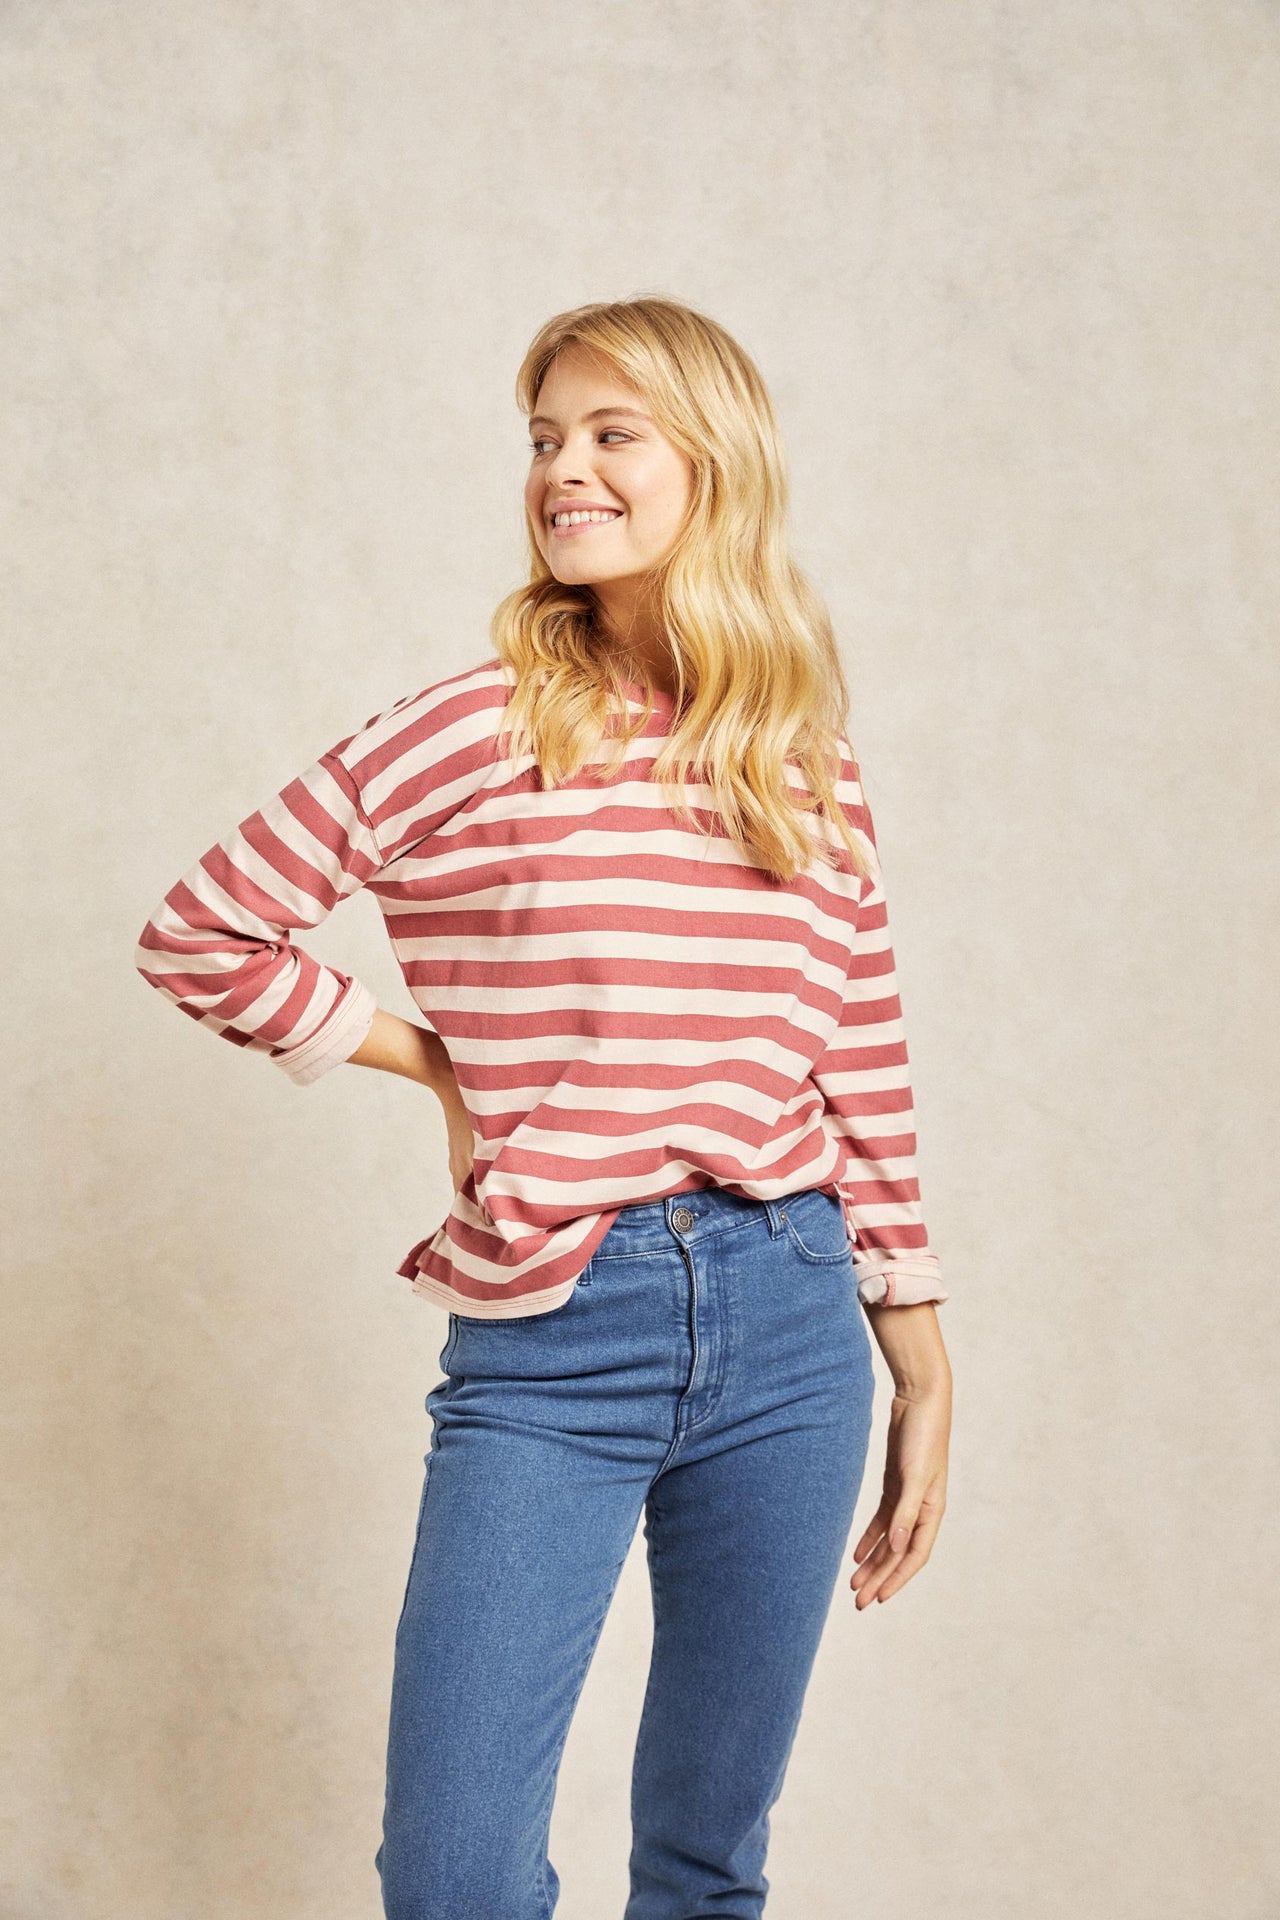 Woven from soft cotton with a plush peached finish. The drop shoulder and maple-red stripes add extra lovability. Long-sleeved tee. Casual wear. Size XS, S, M, L, XL. Machine wash.